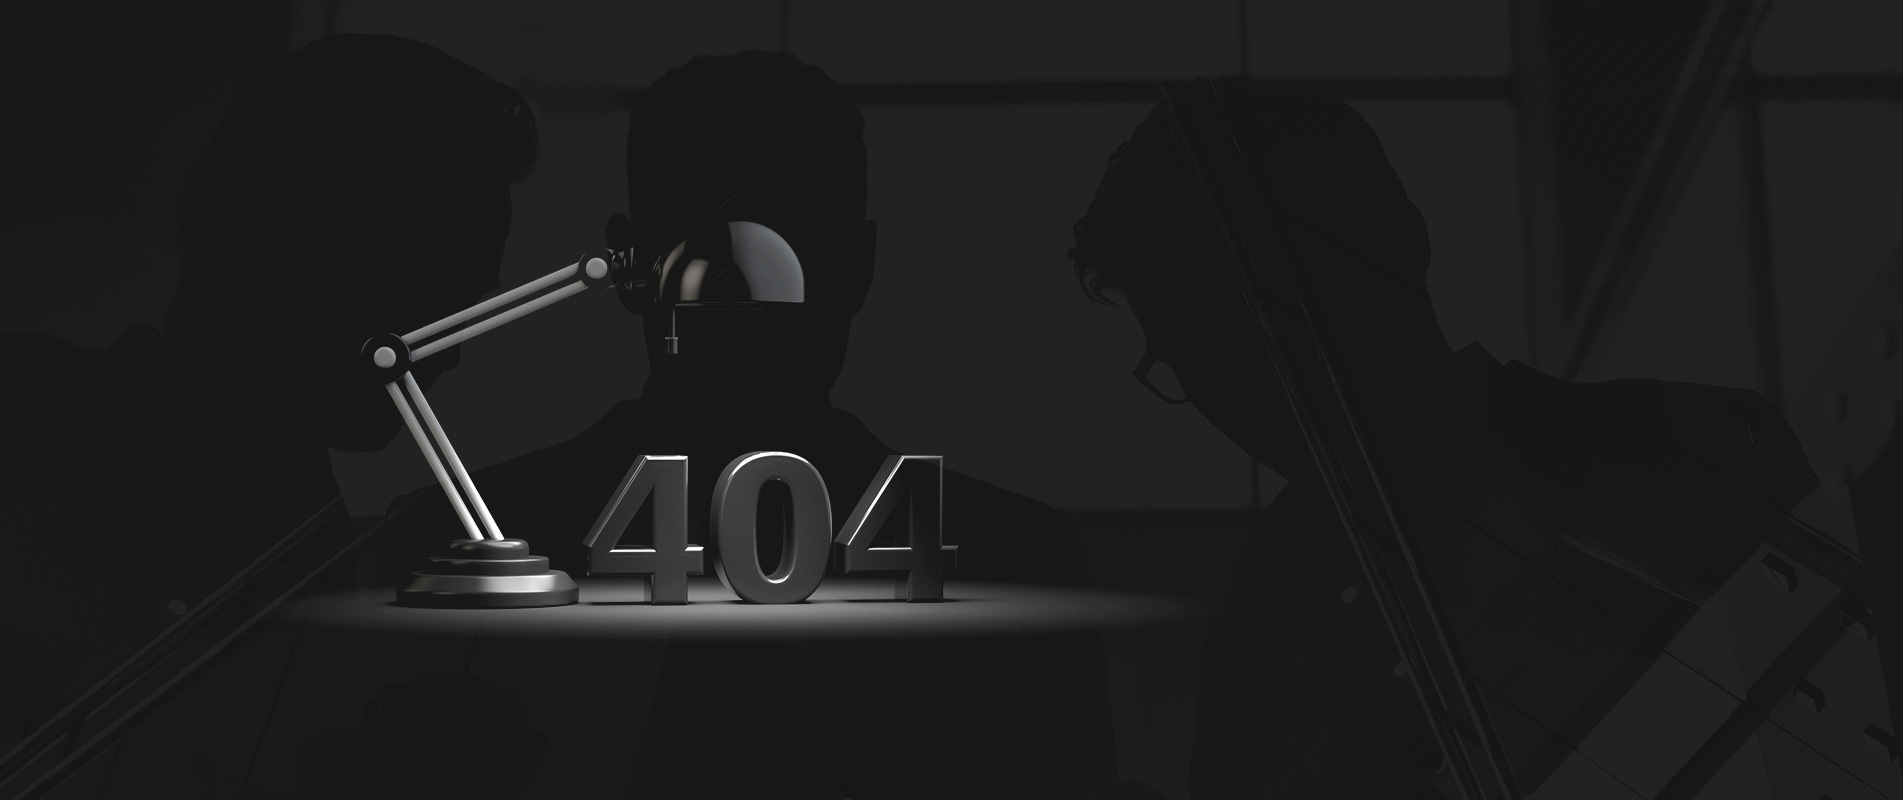 404 page background image